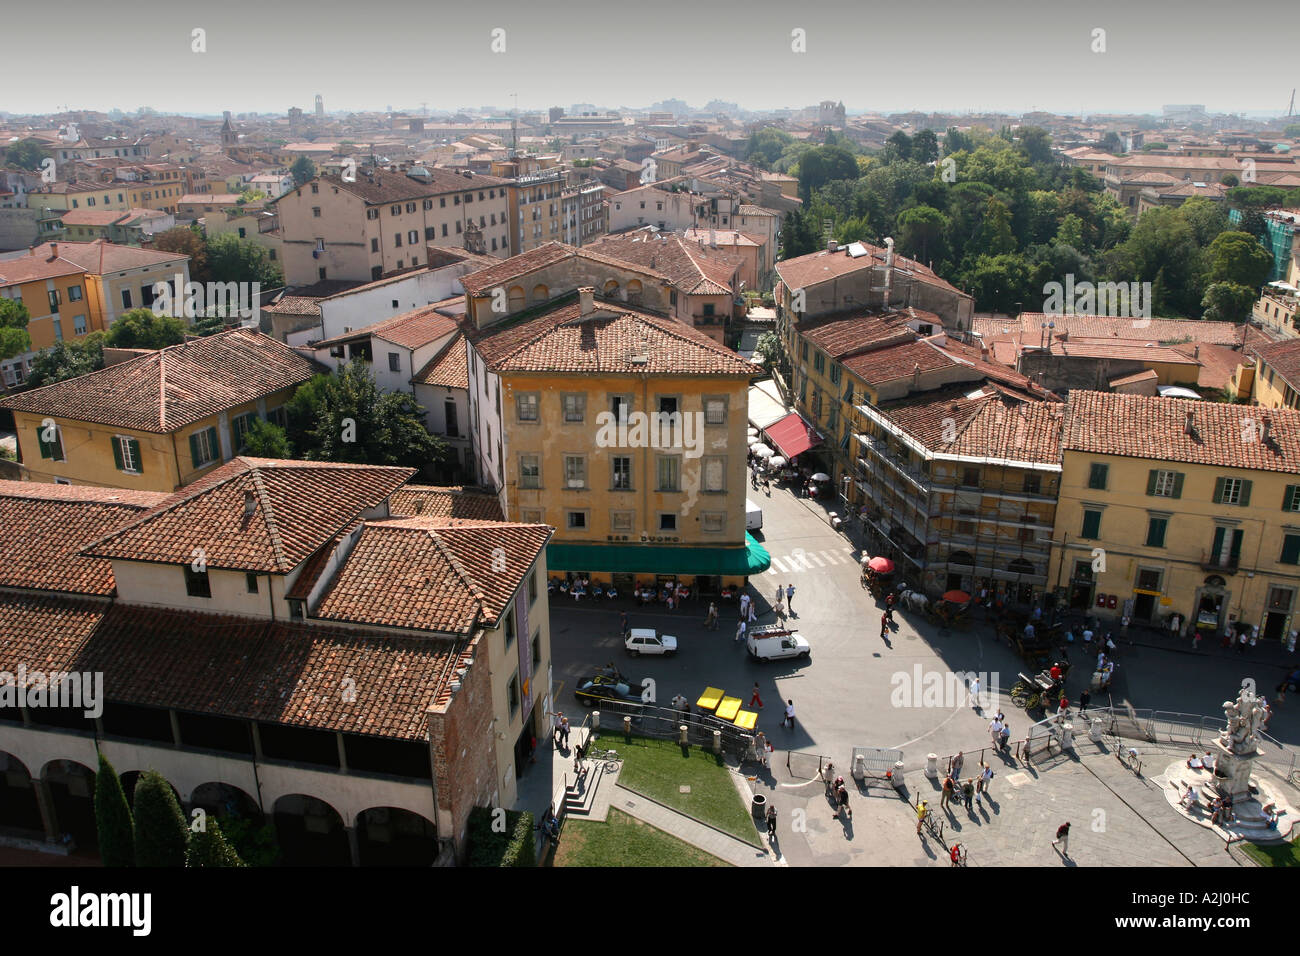 View of the city of Pisa, Western Tuscany, from the Leaning Tower of Pisa, Western Tuscany, Italy Stock Photo